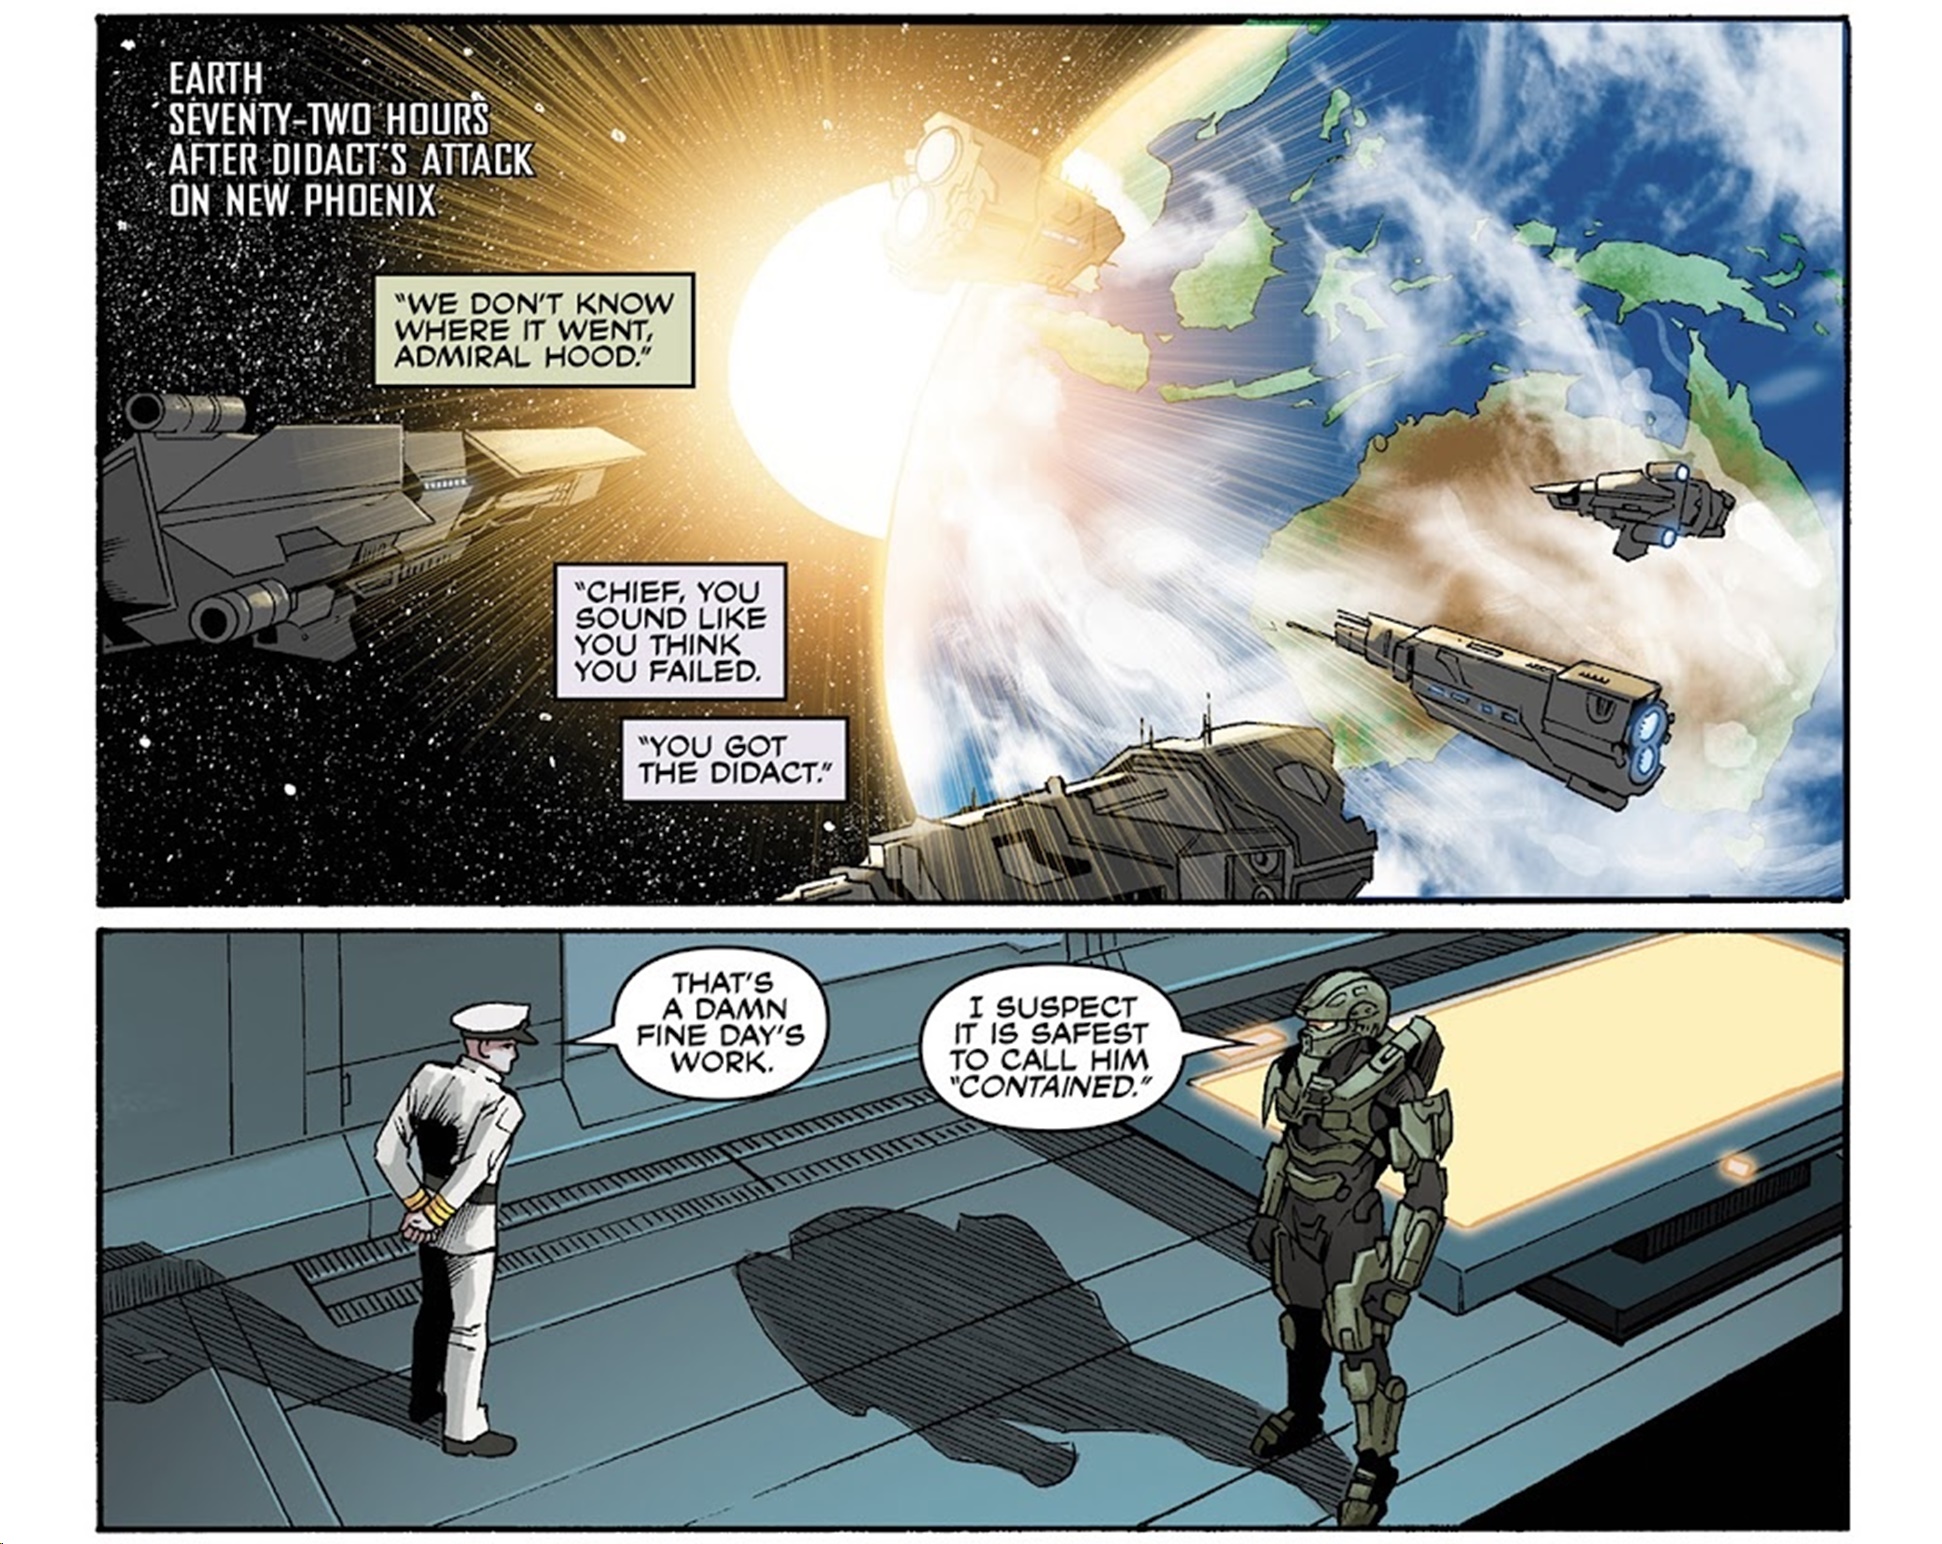 Halo: Escalation comic panel of the Master Chief informing Lord Hood that the Didact has been contained